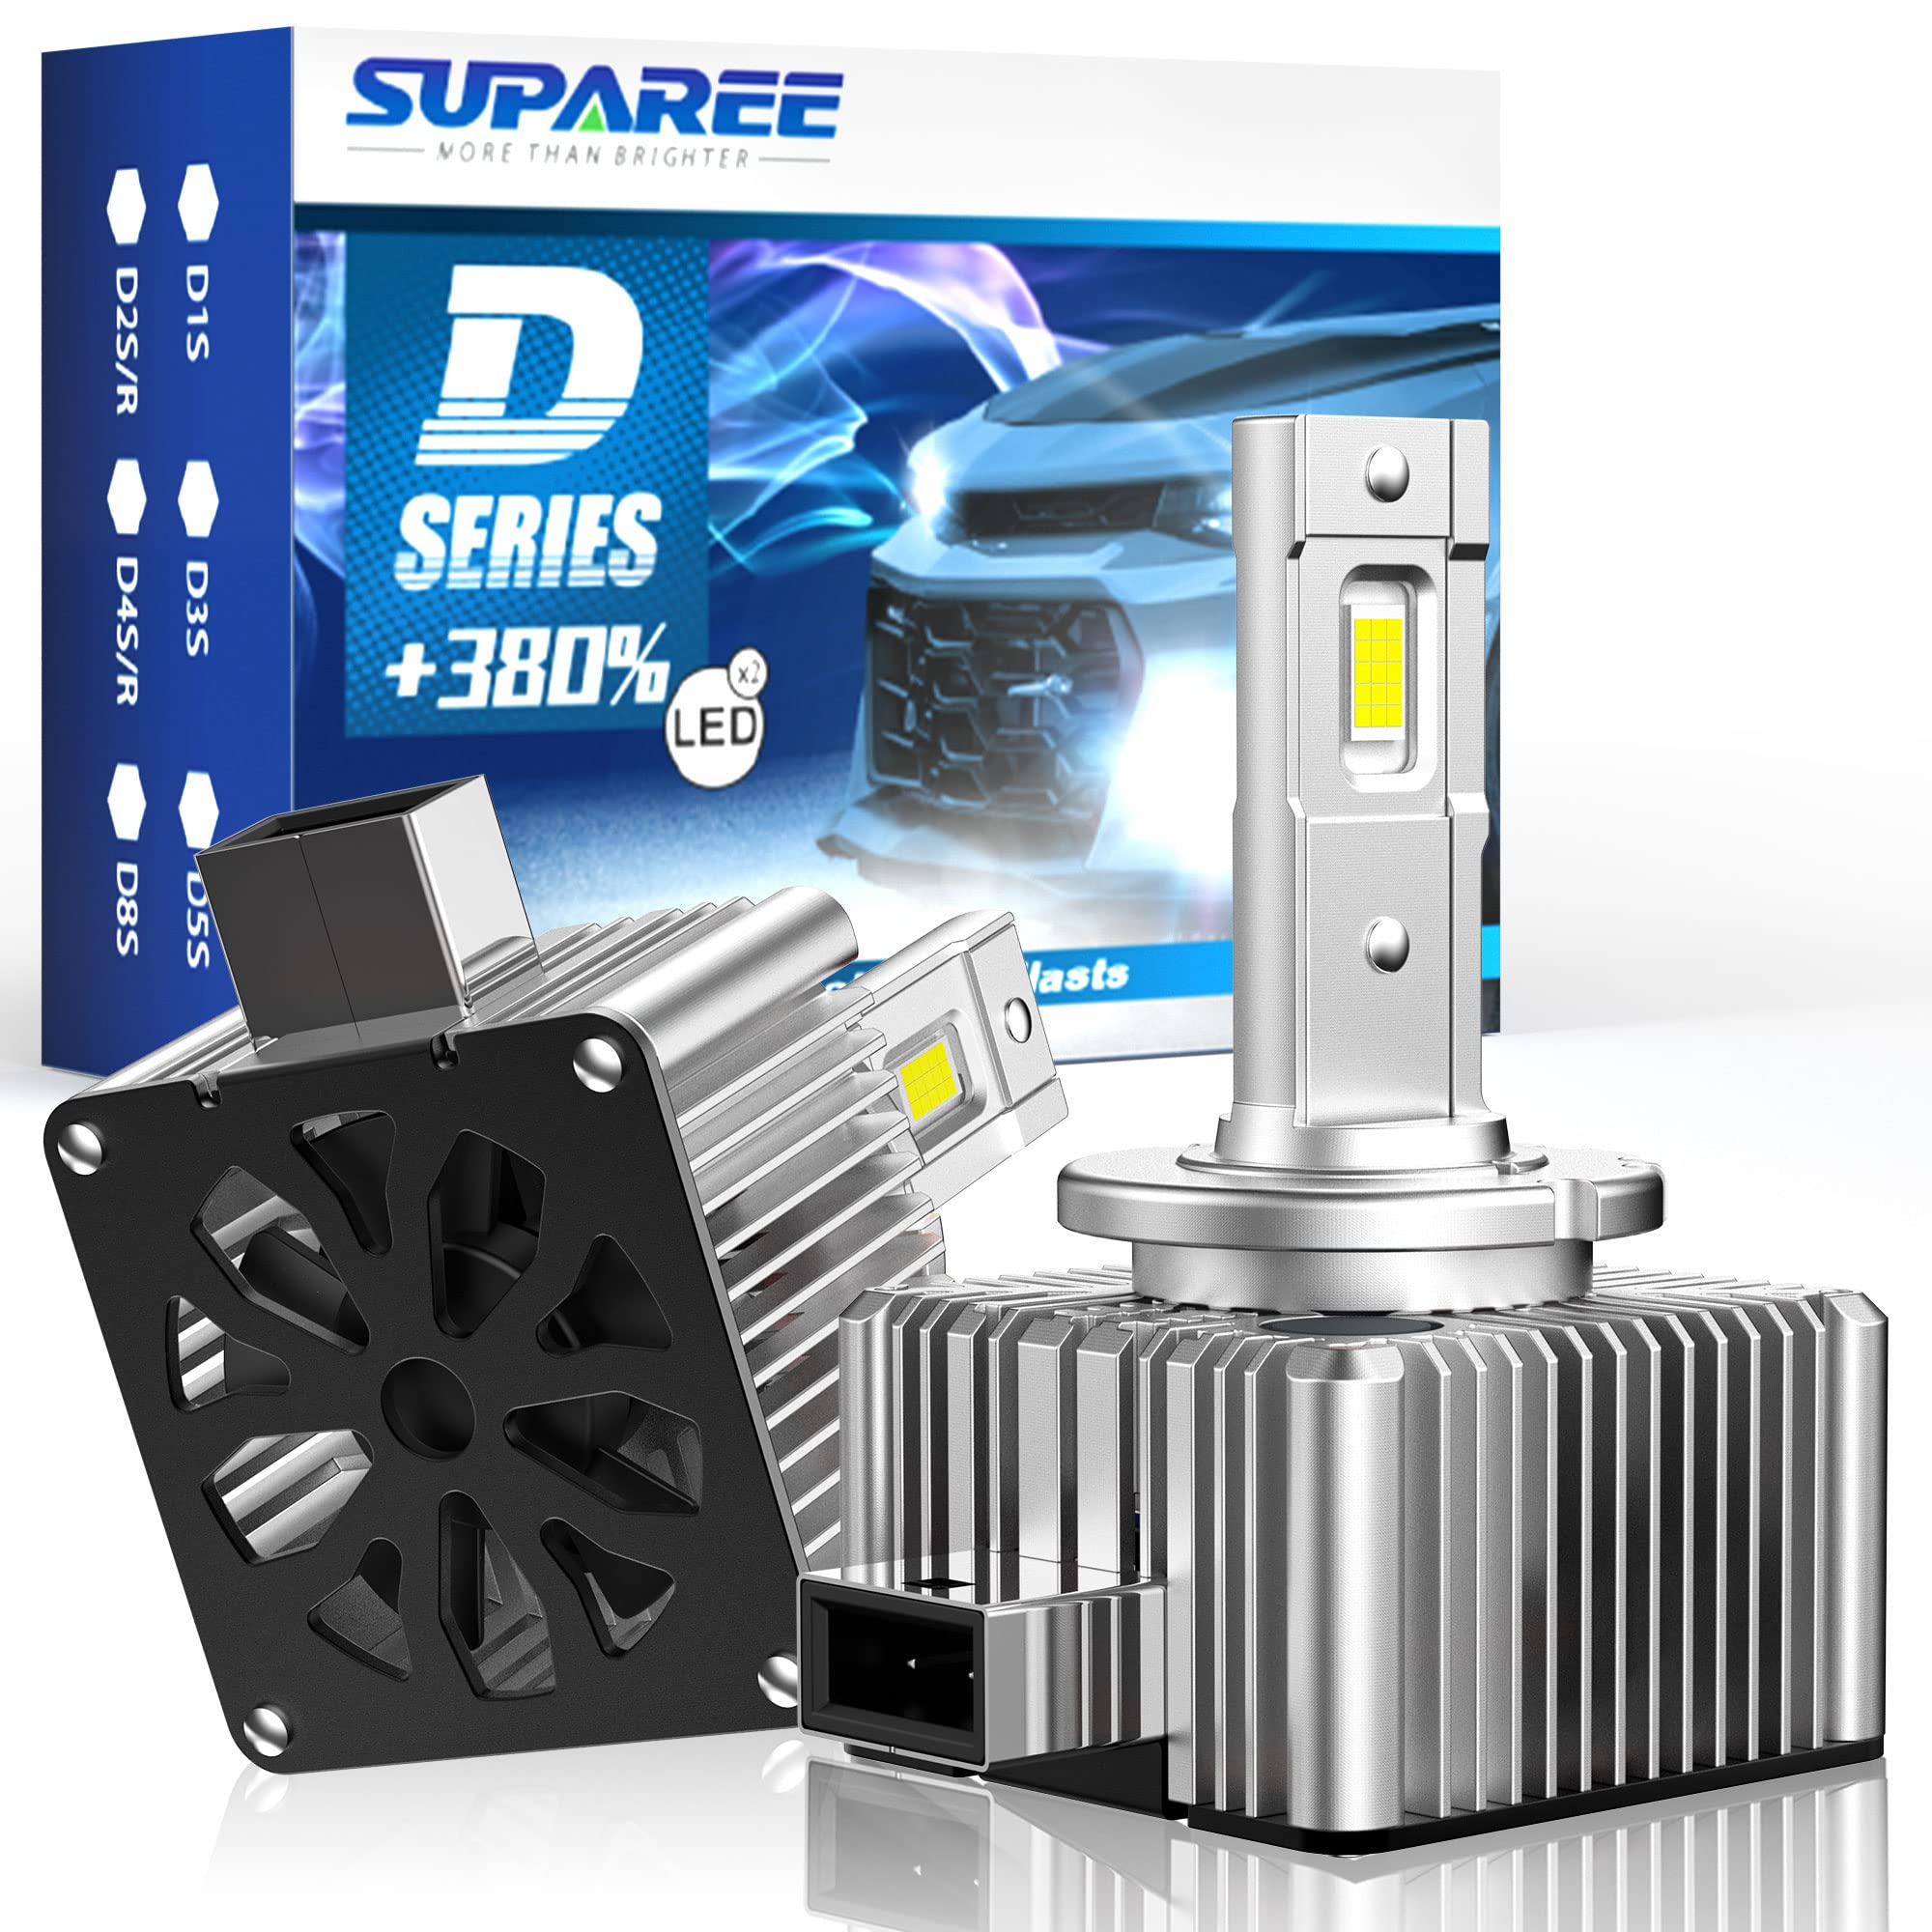 D-SERIES LED BULBS SUPAREE D1S D2S D3S D5S Replace HID 